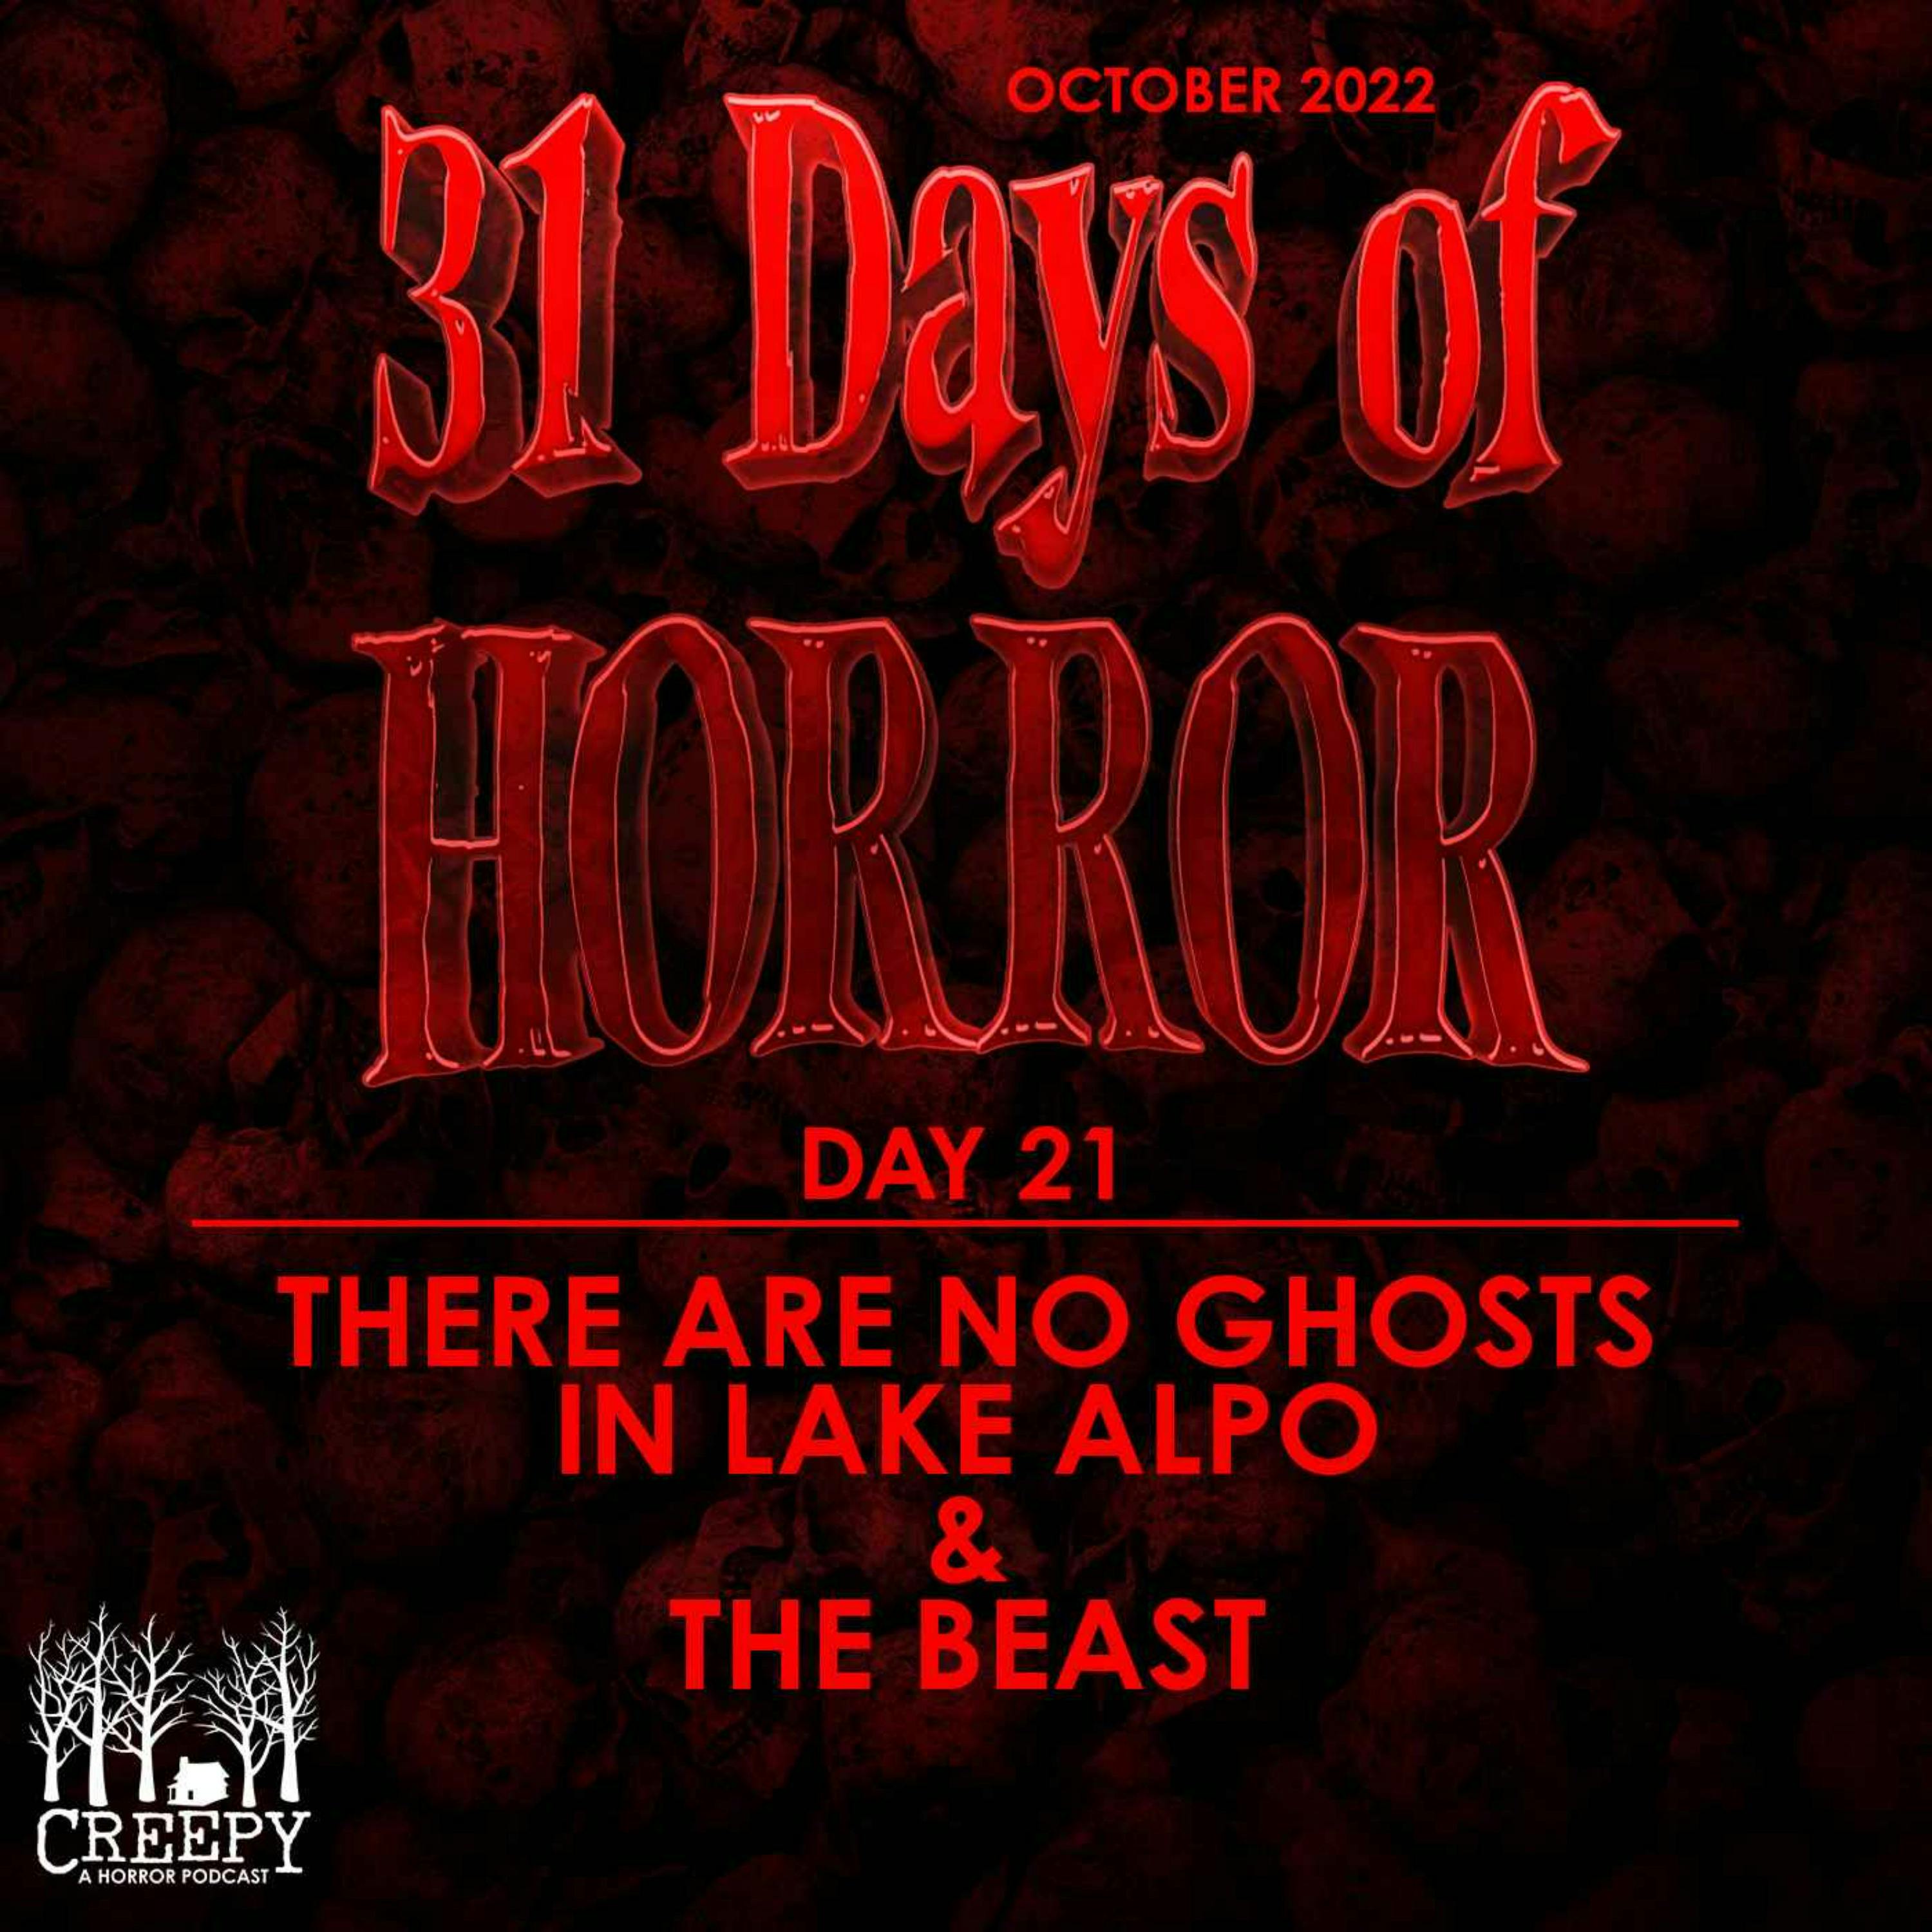 Day 21 - There Are No Ghosts in Lake Alpo & The Beast